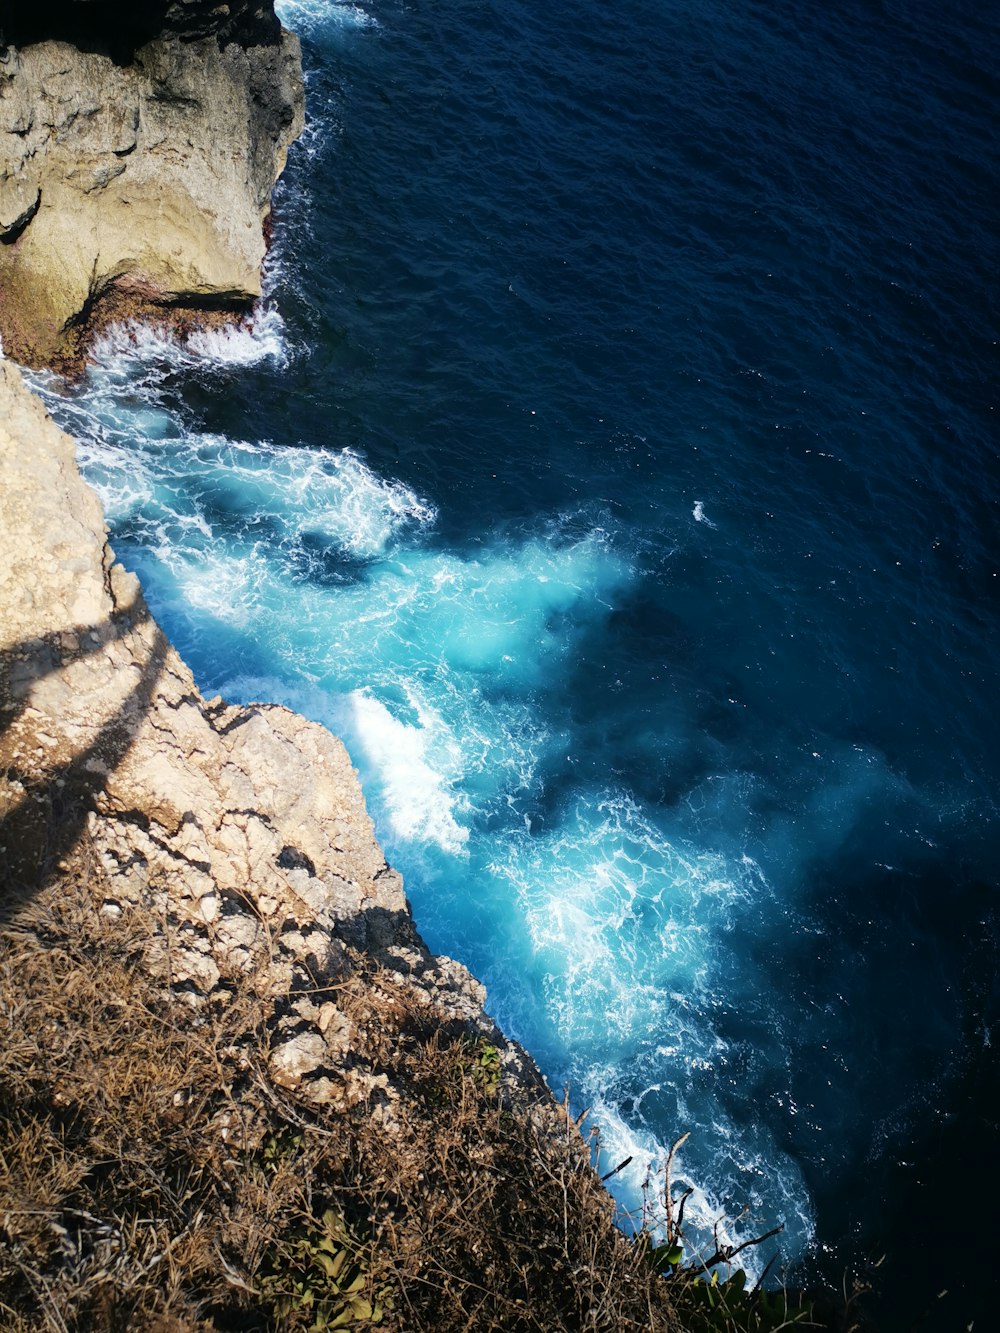 brown rocky shore with blue water waves during daytime